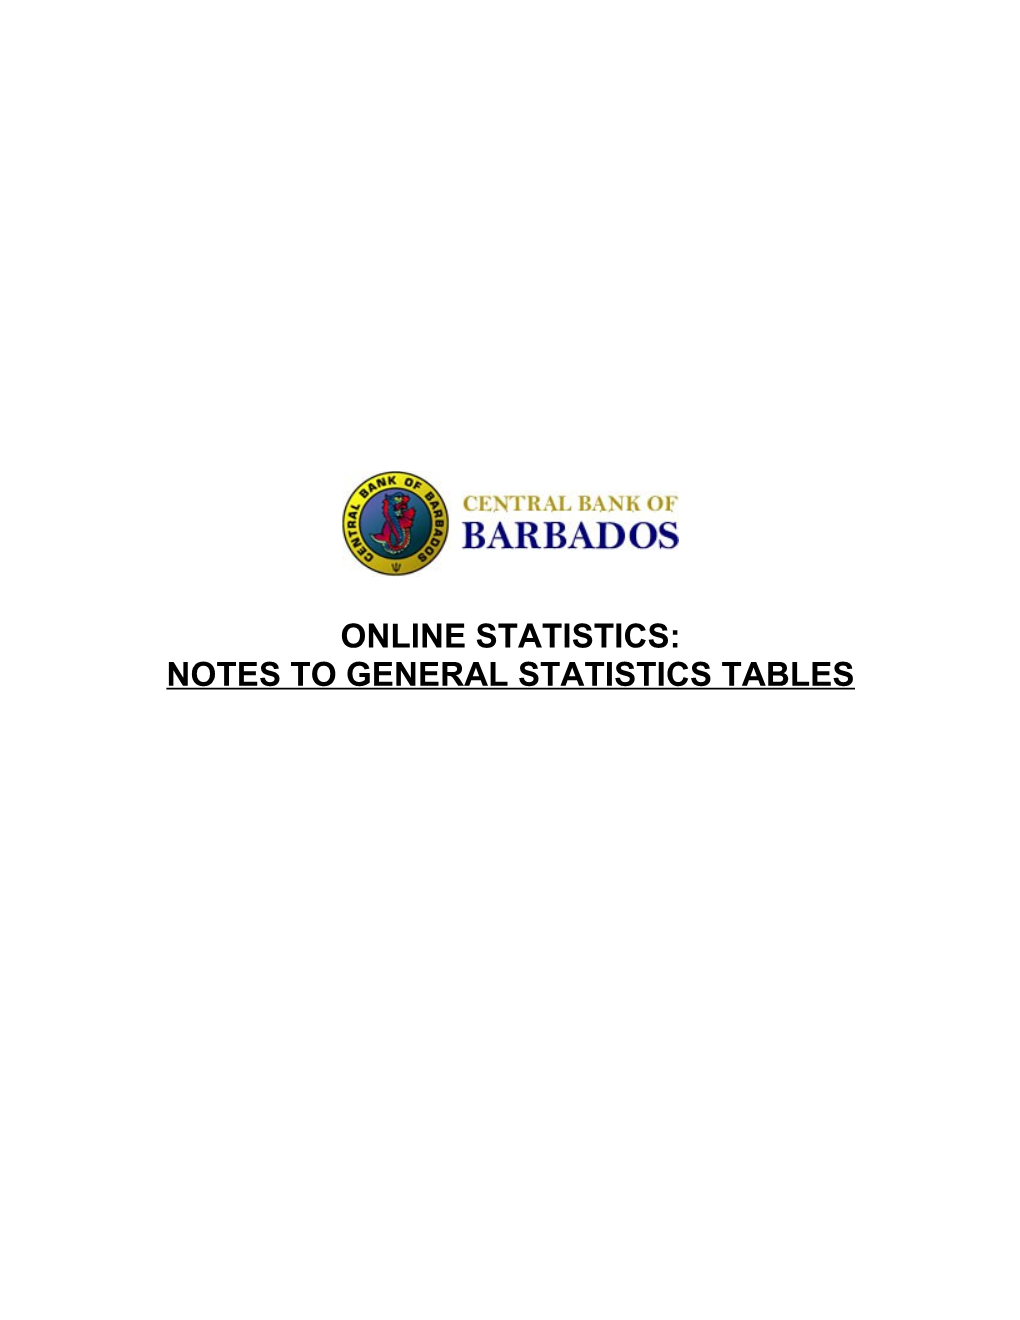 Notes to General Statistics Tables